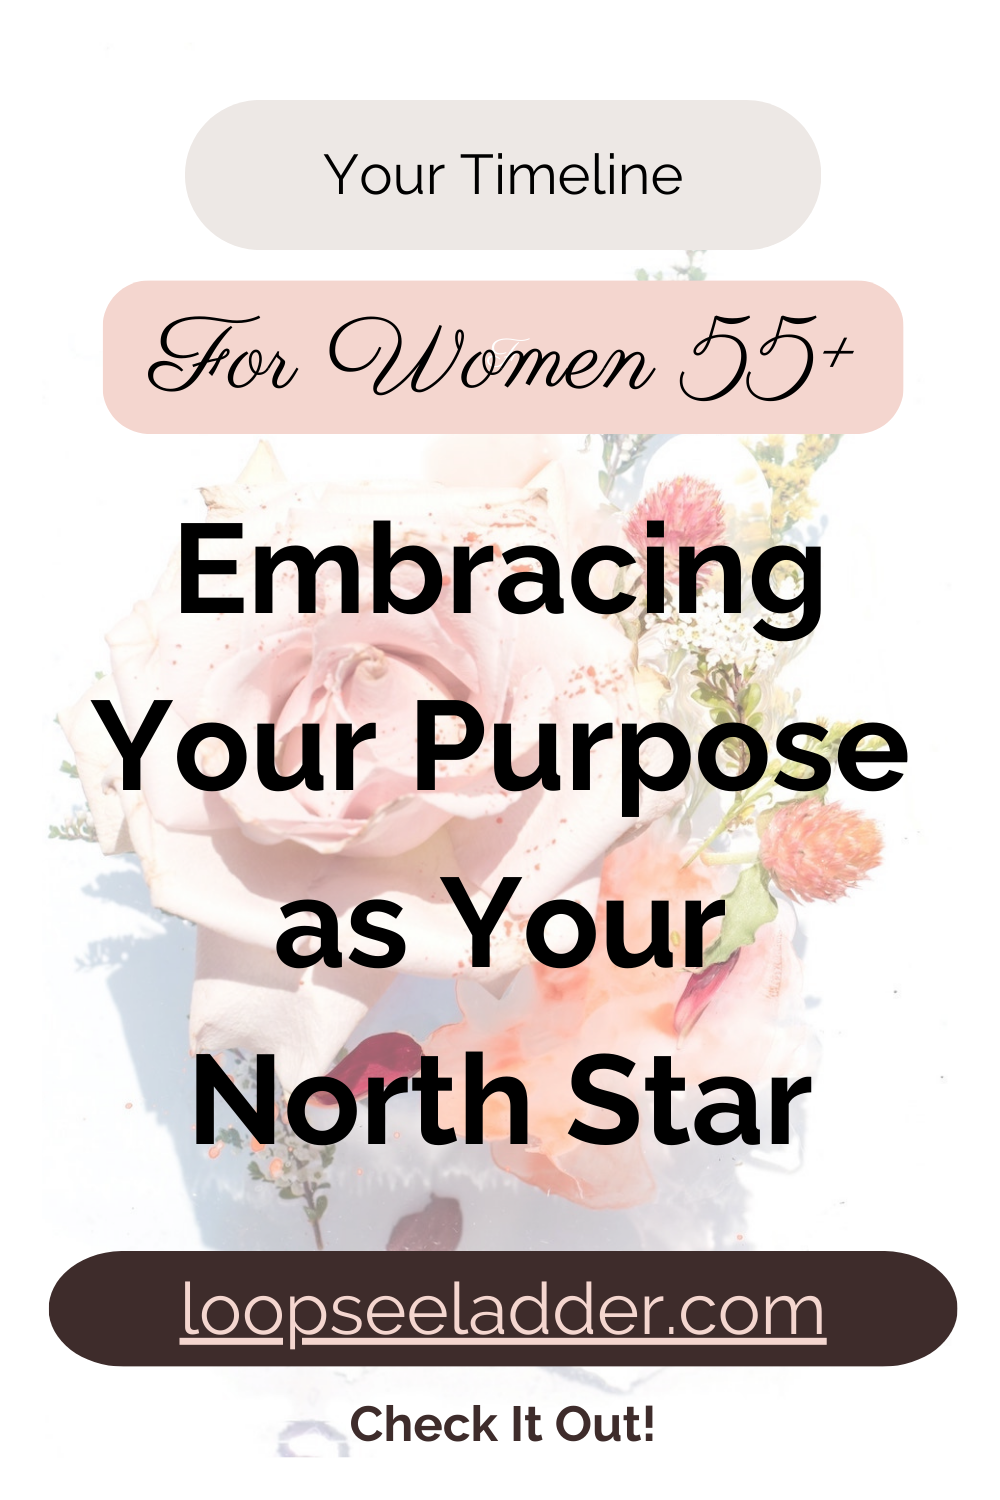 Why Women Over 55 Are Embracing Meaning as Their North Star